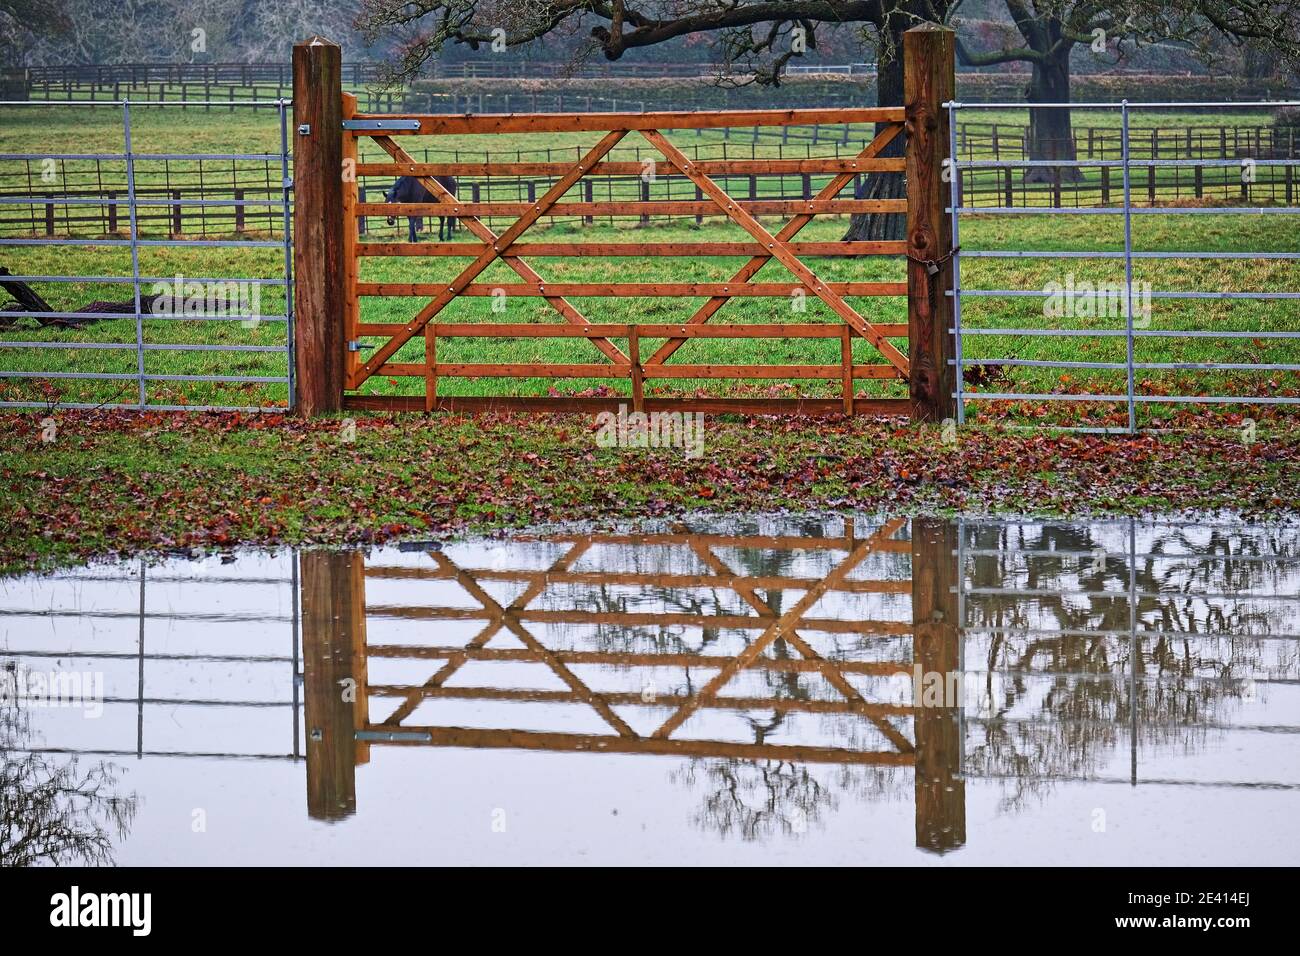 Reflections: 8 Bar Wood Paddock Gate, with cross spars, reflected in foreground pool of rain water, with grass and trees in background Stock Photo